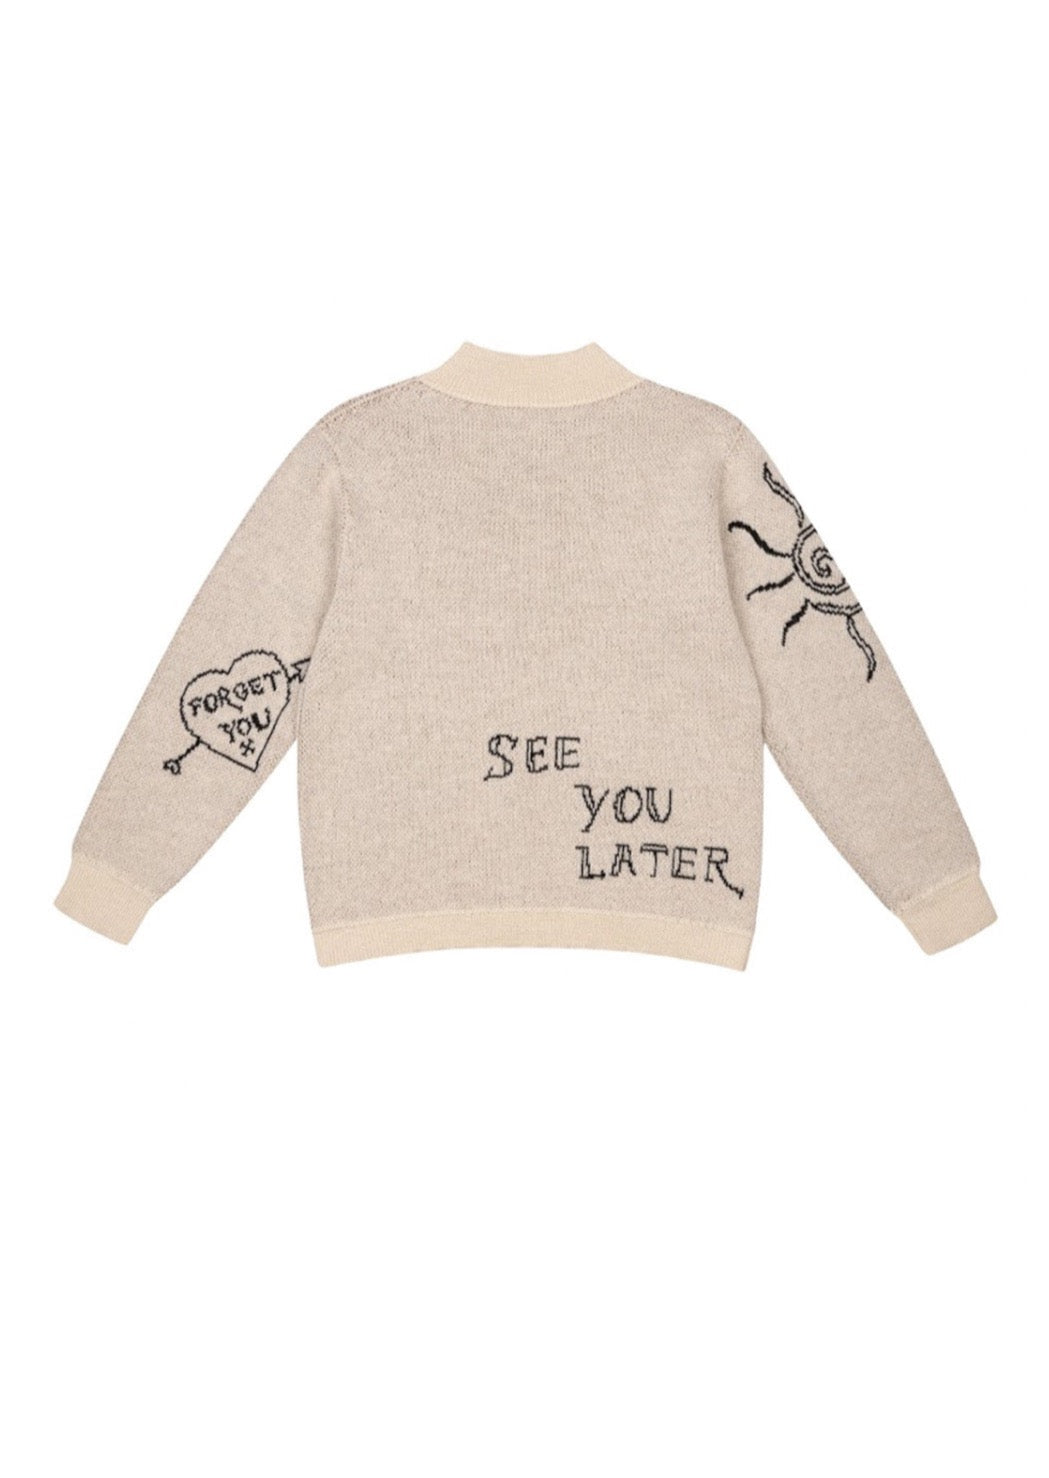 Mock neck sweater with jacquard tattoo print illustrated by designer Olivia Cheng. 